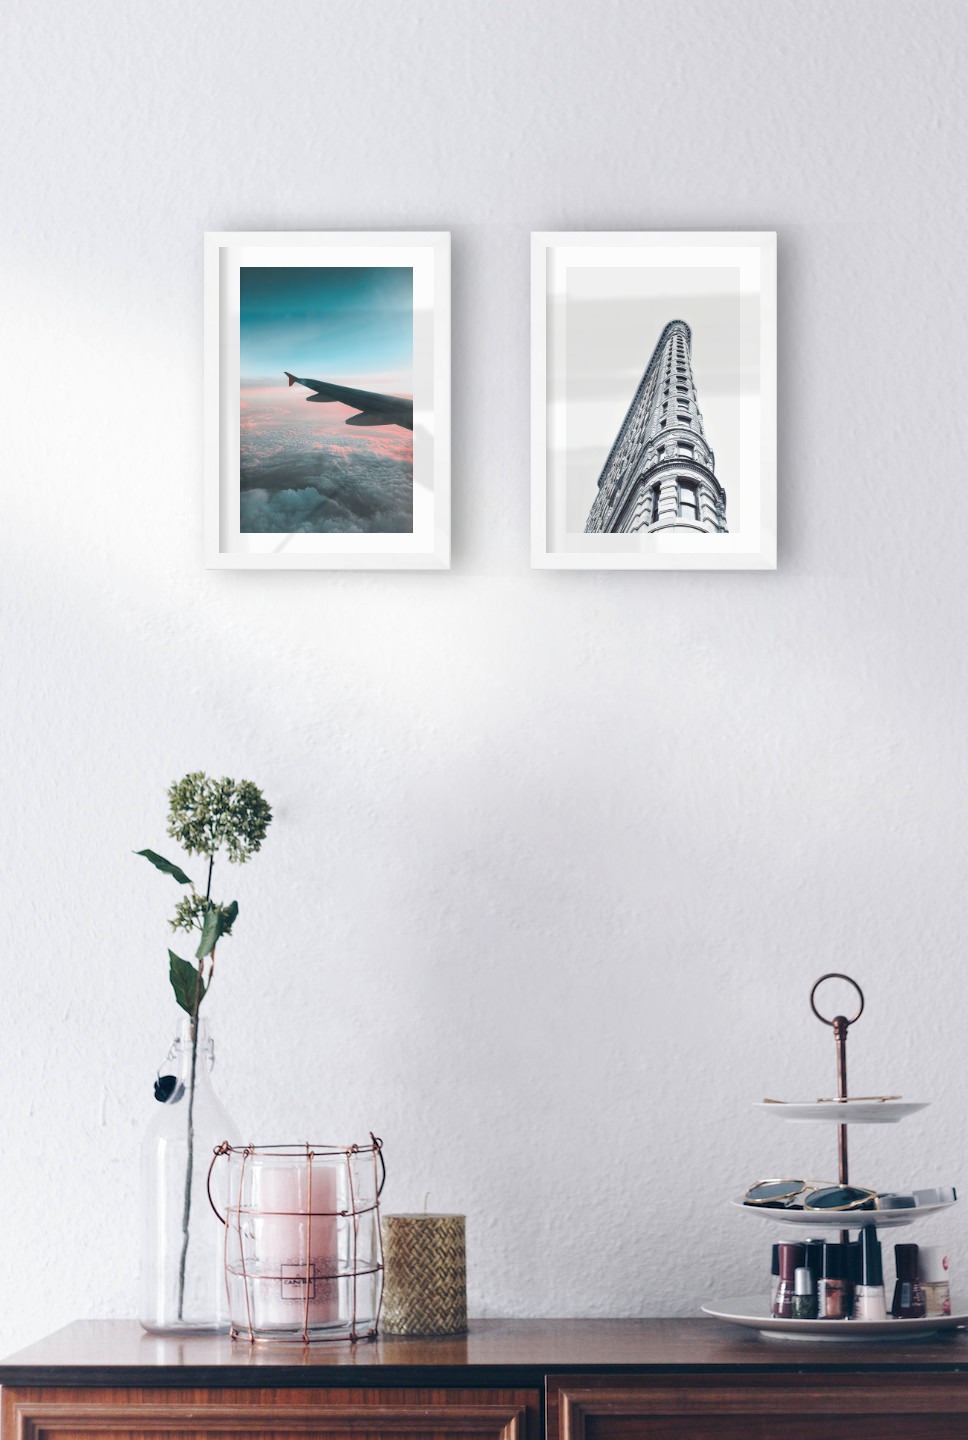 Gallery wall with picture frames in white in sizes 21x30 with prints "Above the clouds" and "Gray building"